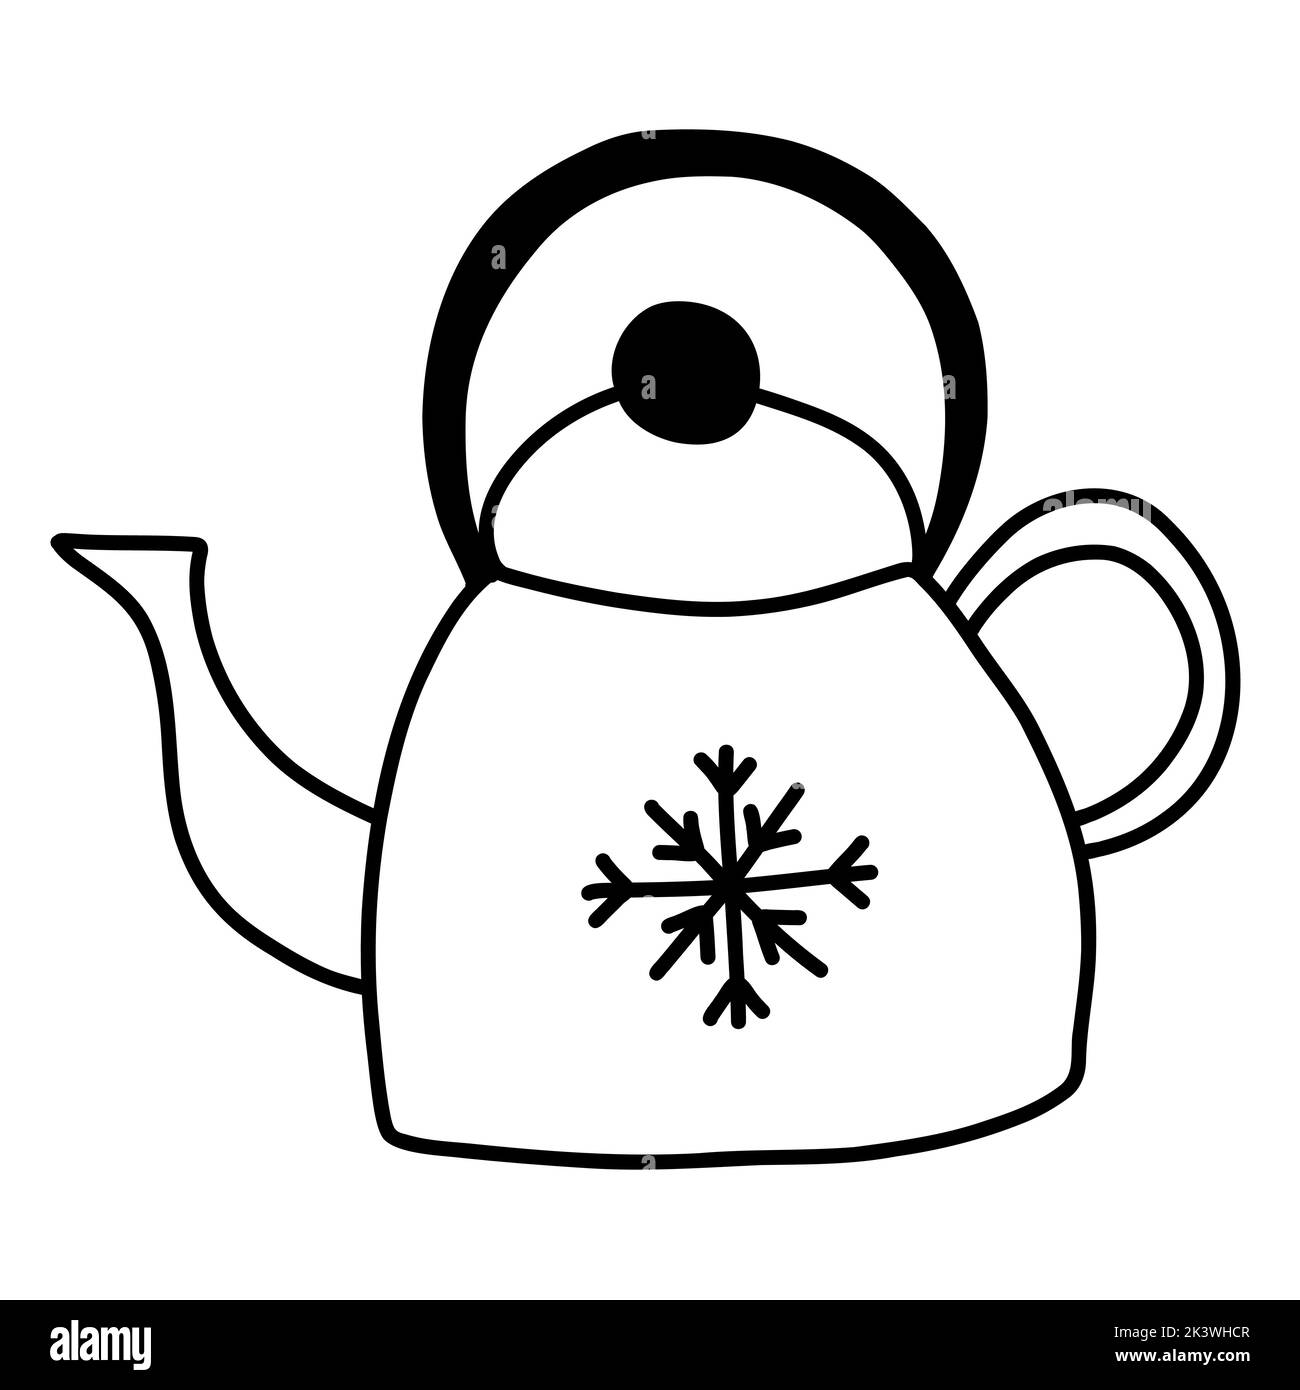 Hand drawn doodle teapots with snowflake in vector format for web, print, or advertising use. Stock Vector